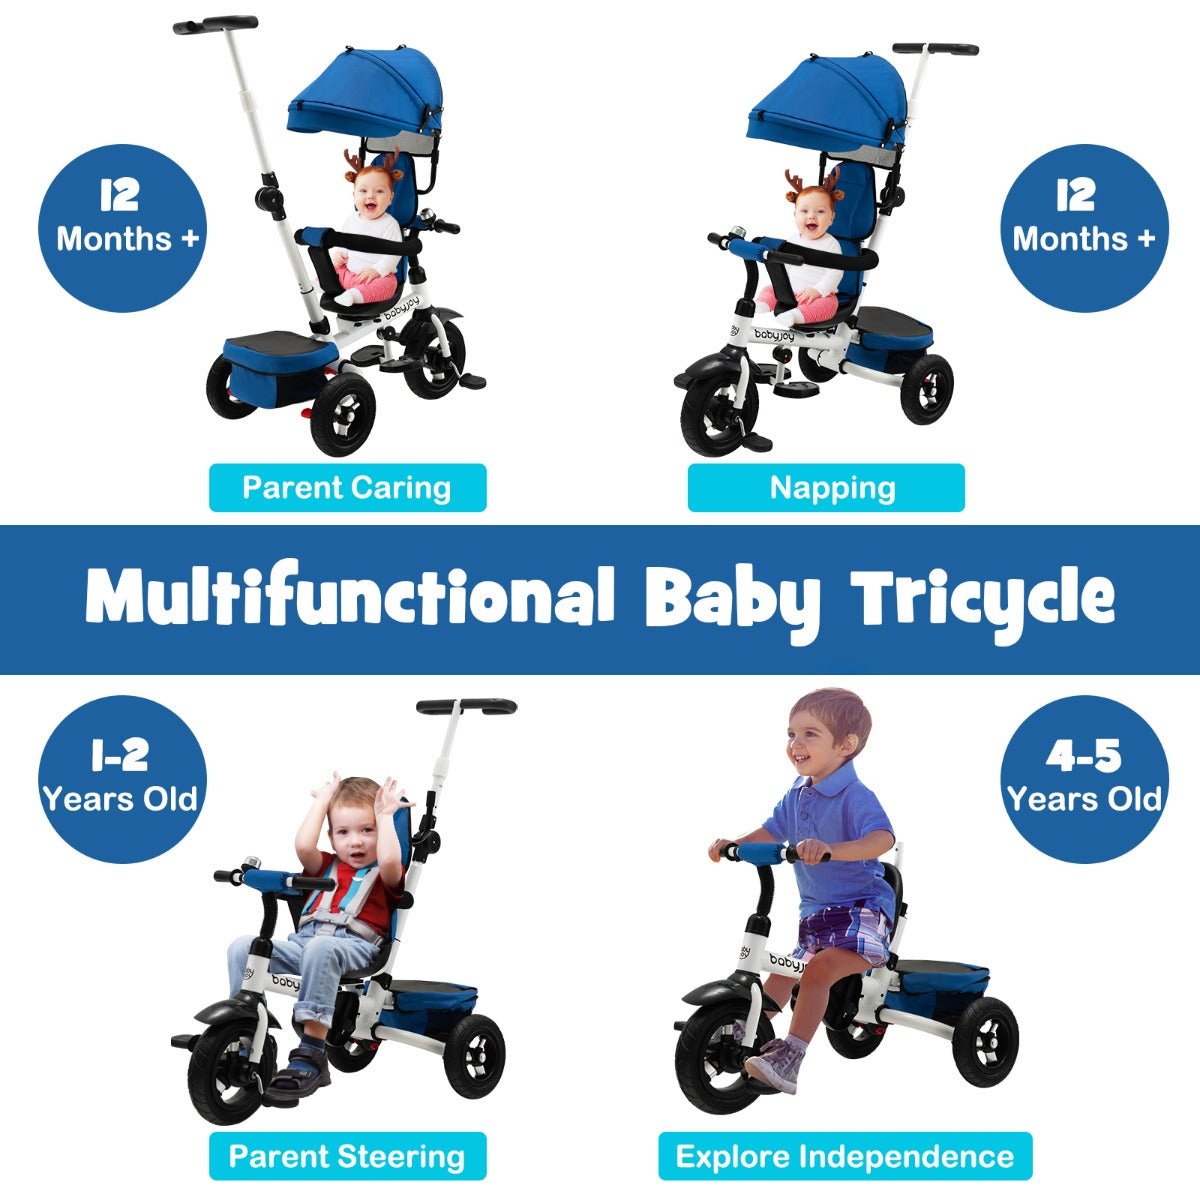 Experience Delight with the Blue Tricycle Stroller